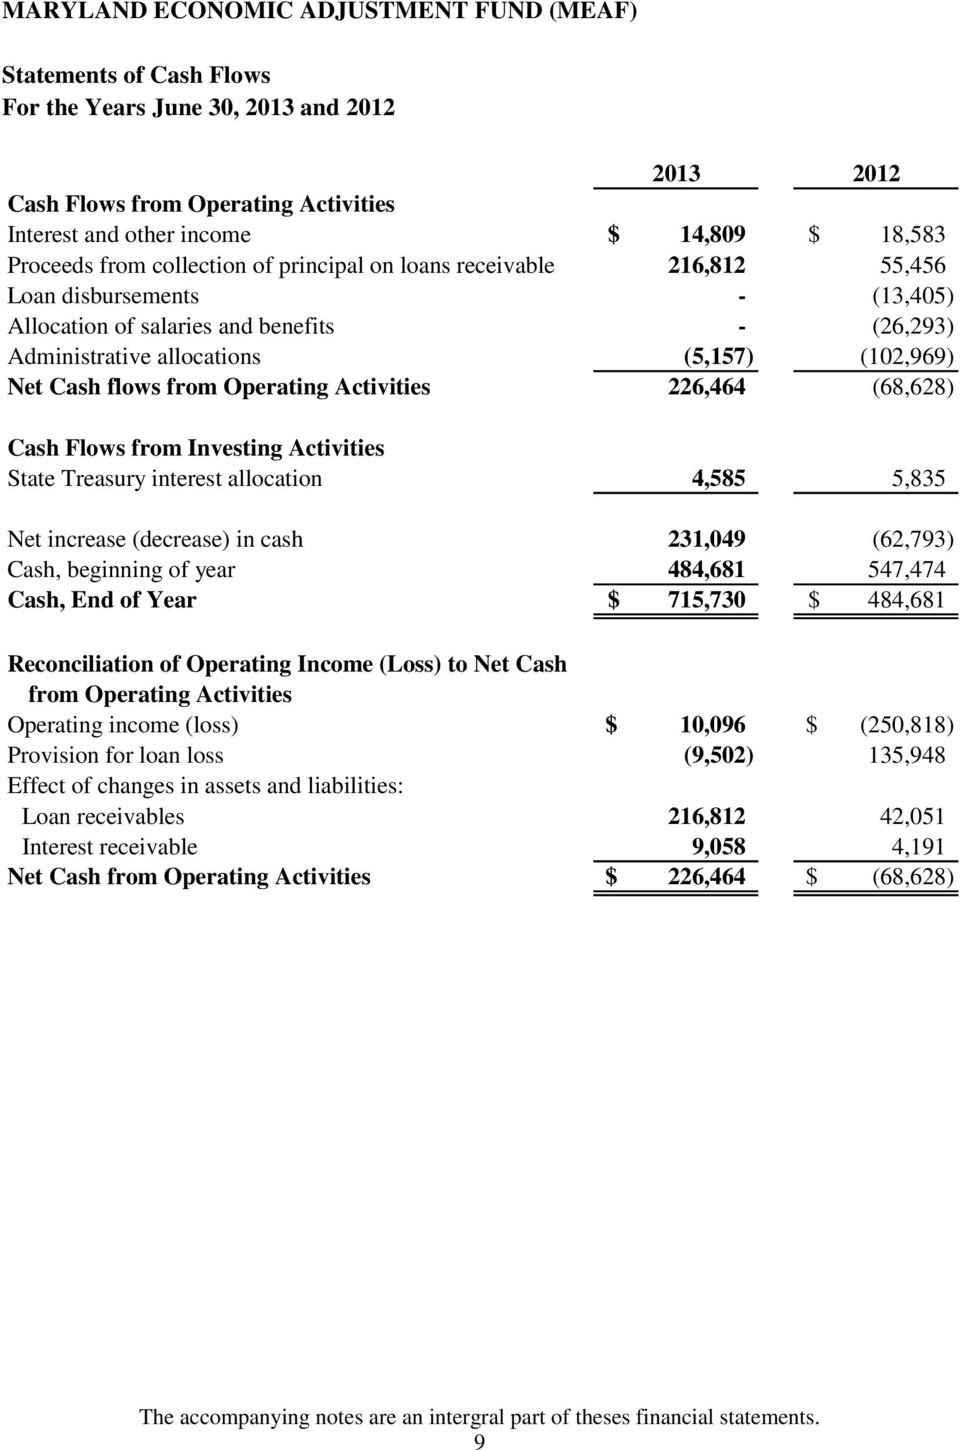 from Investing Activities State Treasury interest allocation 4,585 5,835 Net increase (decrease) in cash 231,049 (62,793) Cash, beginning of year 484,681 547,474 Cash, End of Year $ 715,730 $ 484,681